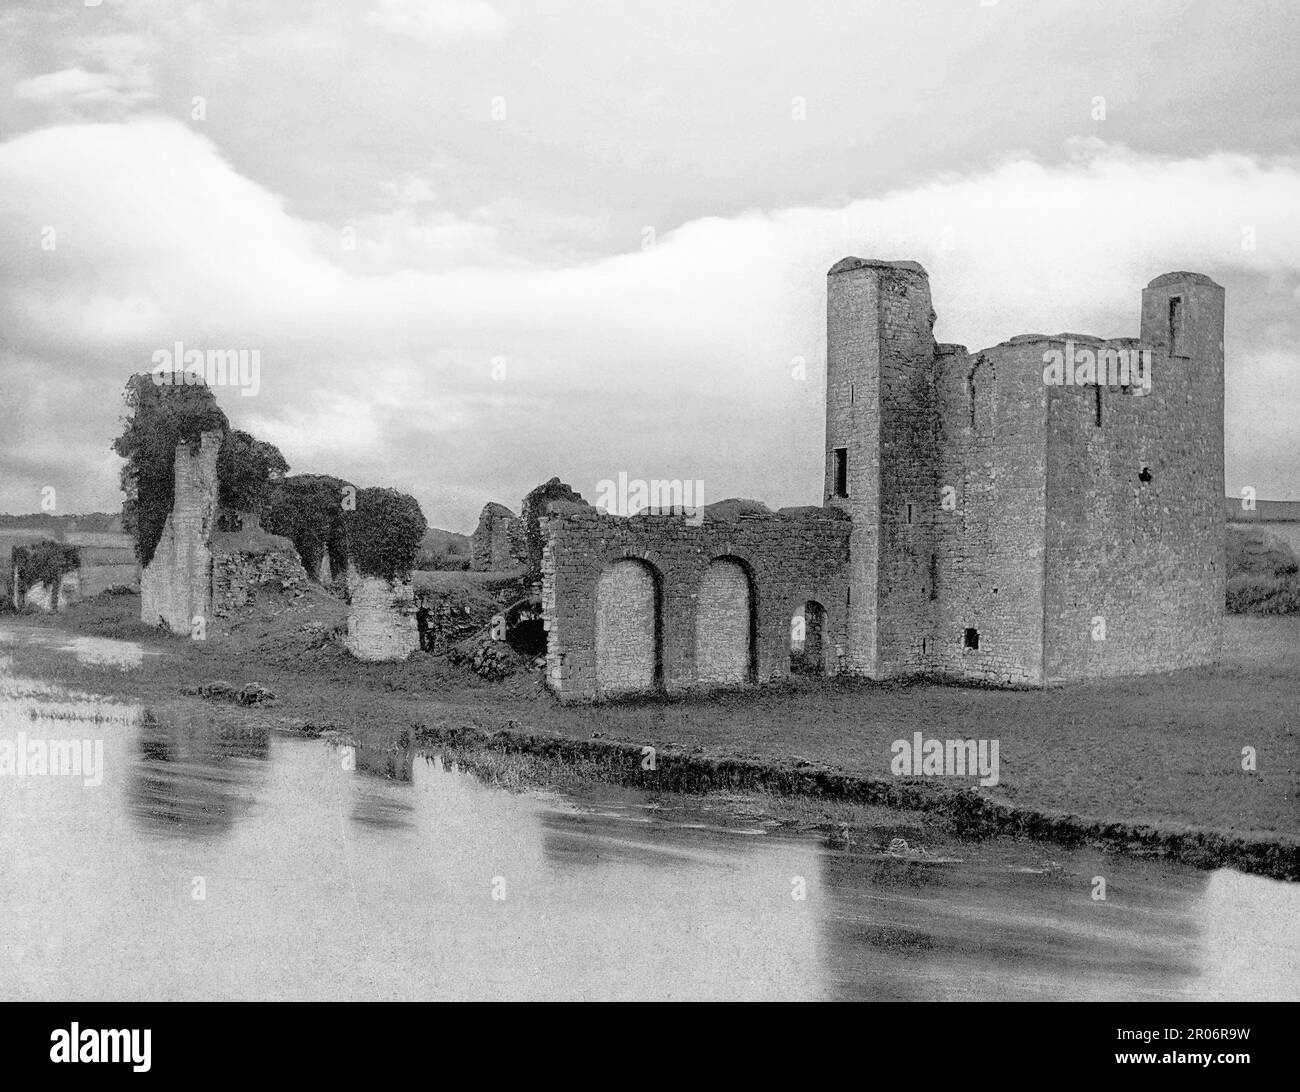 A late 19th century view of the then ruins of   Trim Castle on the south bank of the River Boyne in Trim, County Meath, Ireland. Built by Hugh de Lacy, during the 15th century the Irish Parliament met there several times and a mint operated in the castle. It was at that time the centre of administration for Meath and marked the outer northern boundary of The Pale. In the 16th century it fell into decline and was allowed to deteriorate, but was refortified during the Irish Confederate Wars in the 1640s. Stock Photo